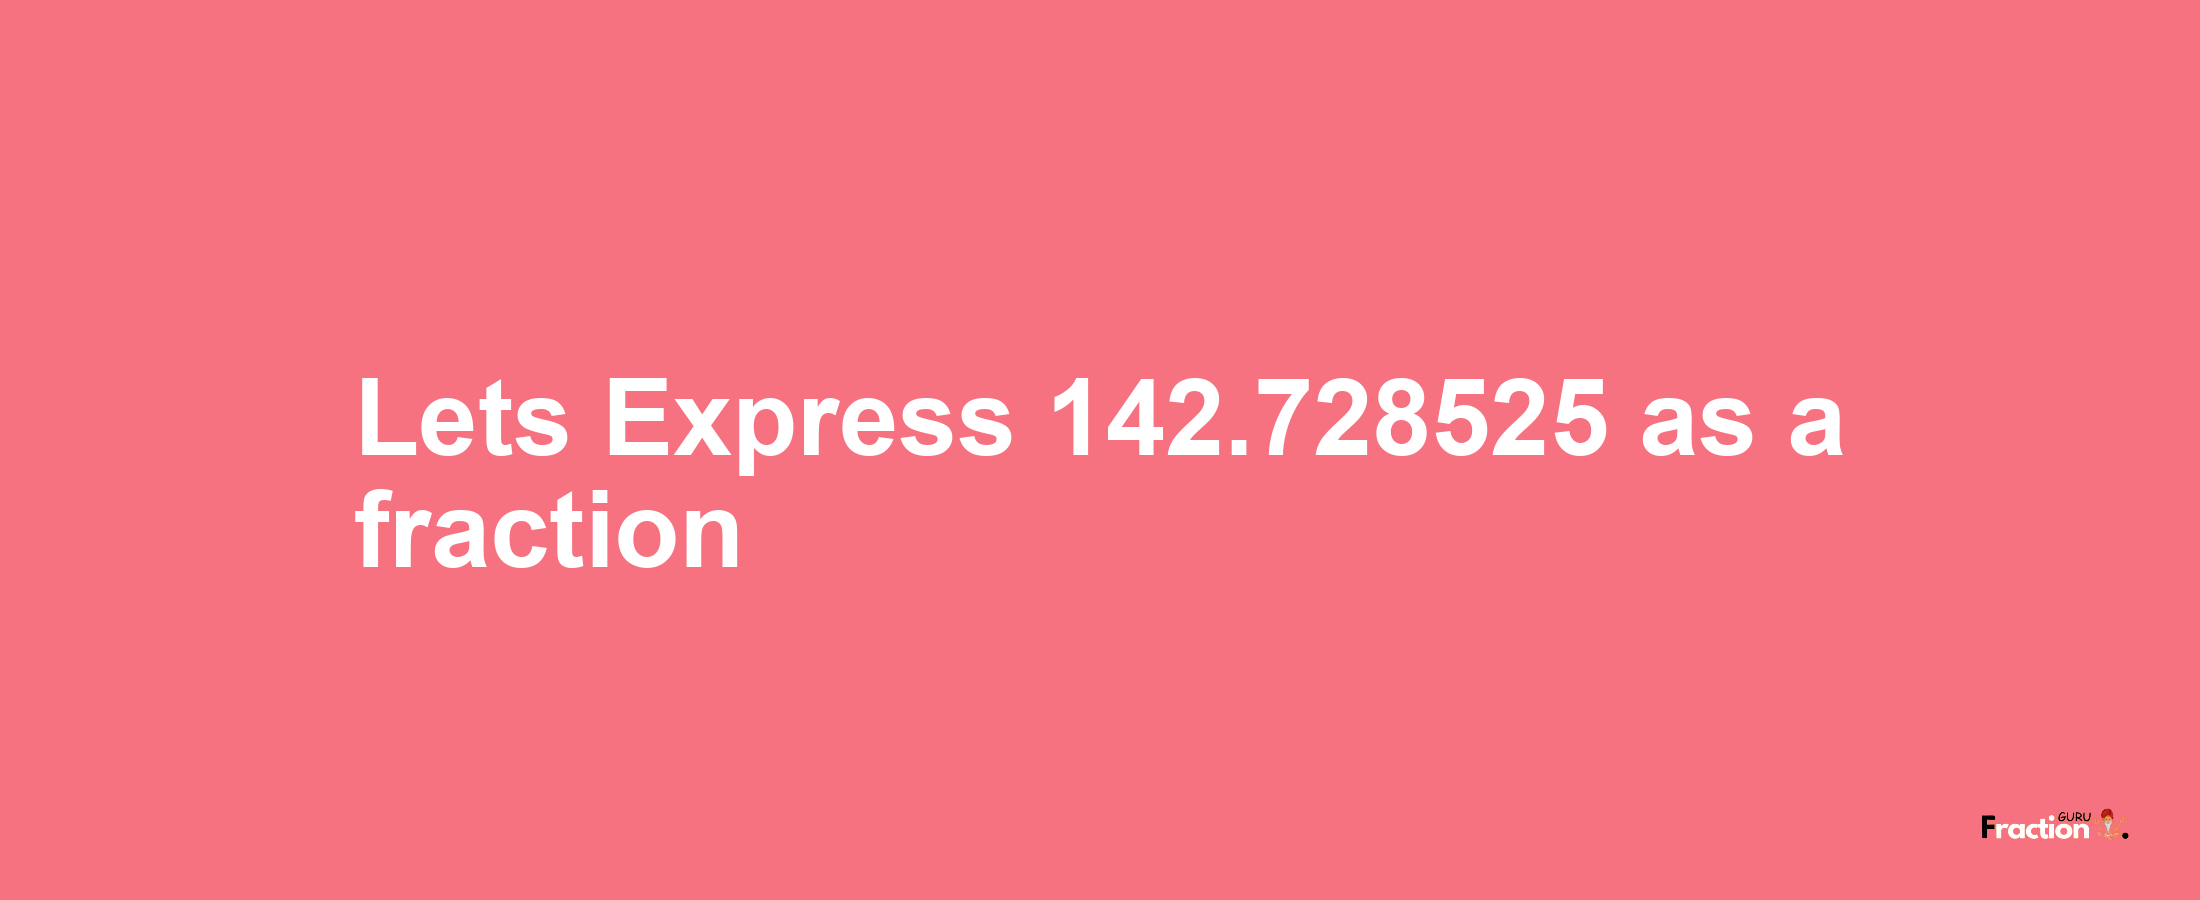 Lets Express 142.728525 as afraction